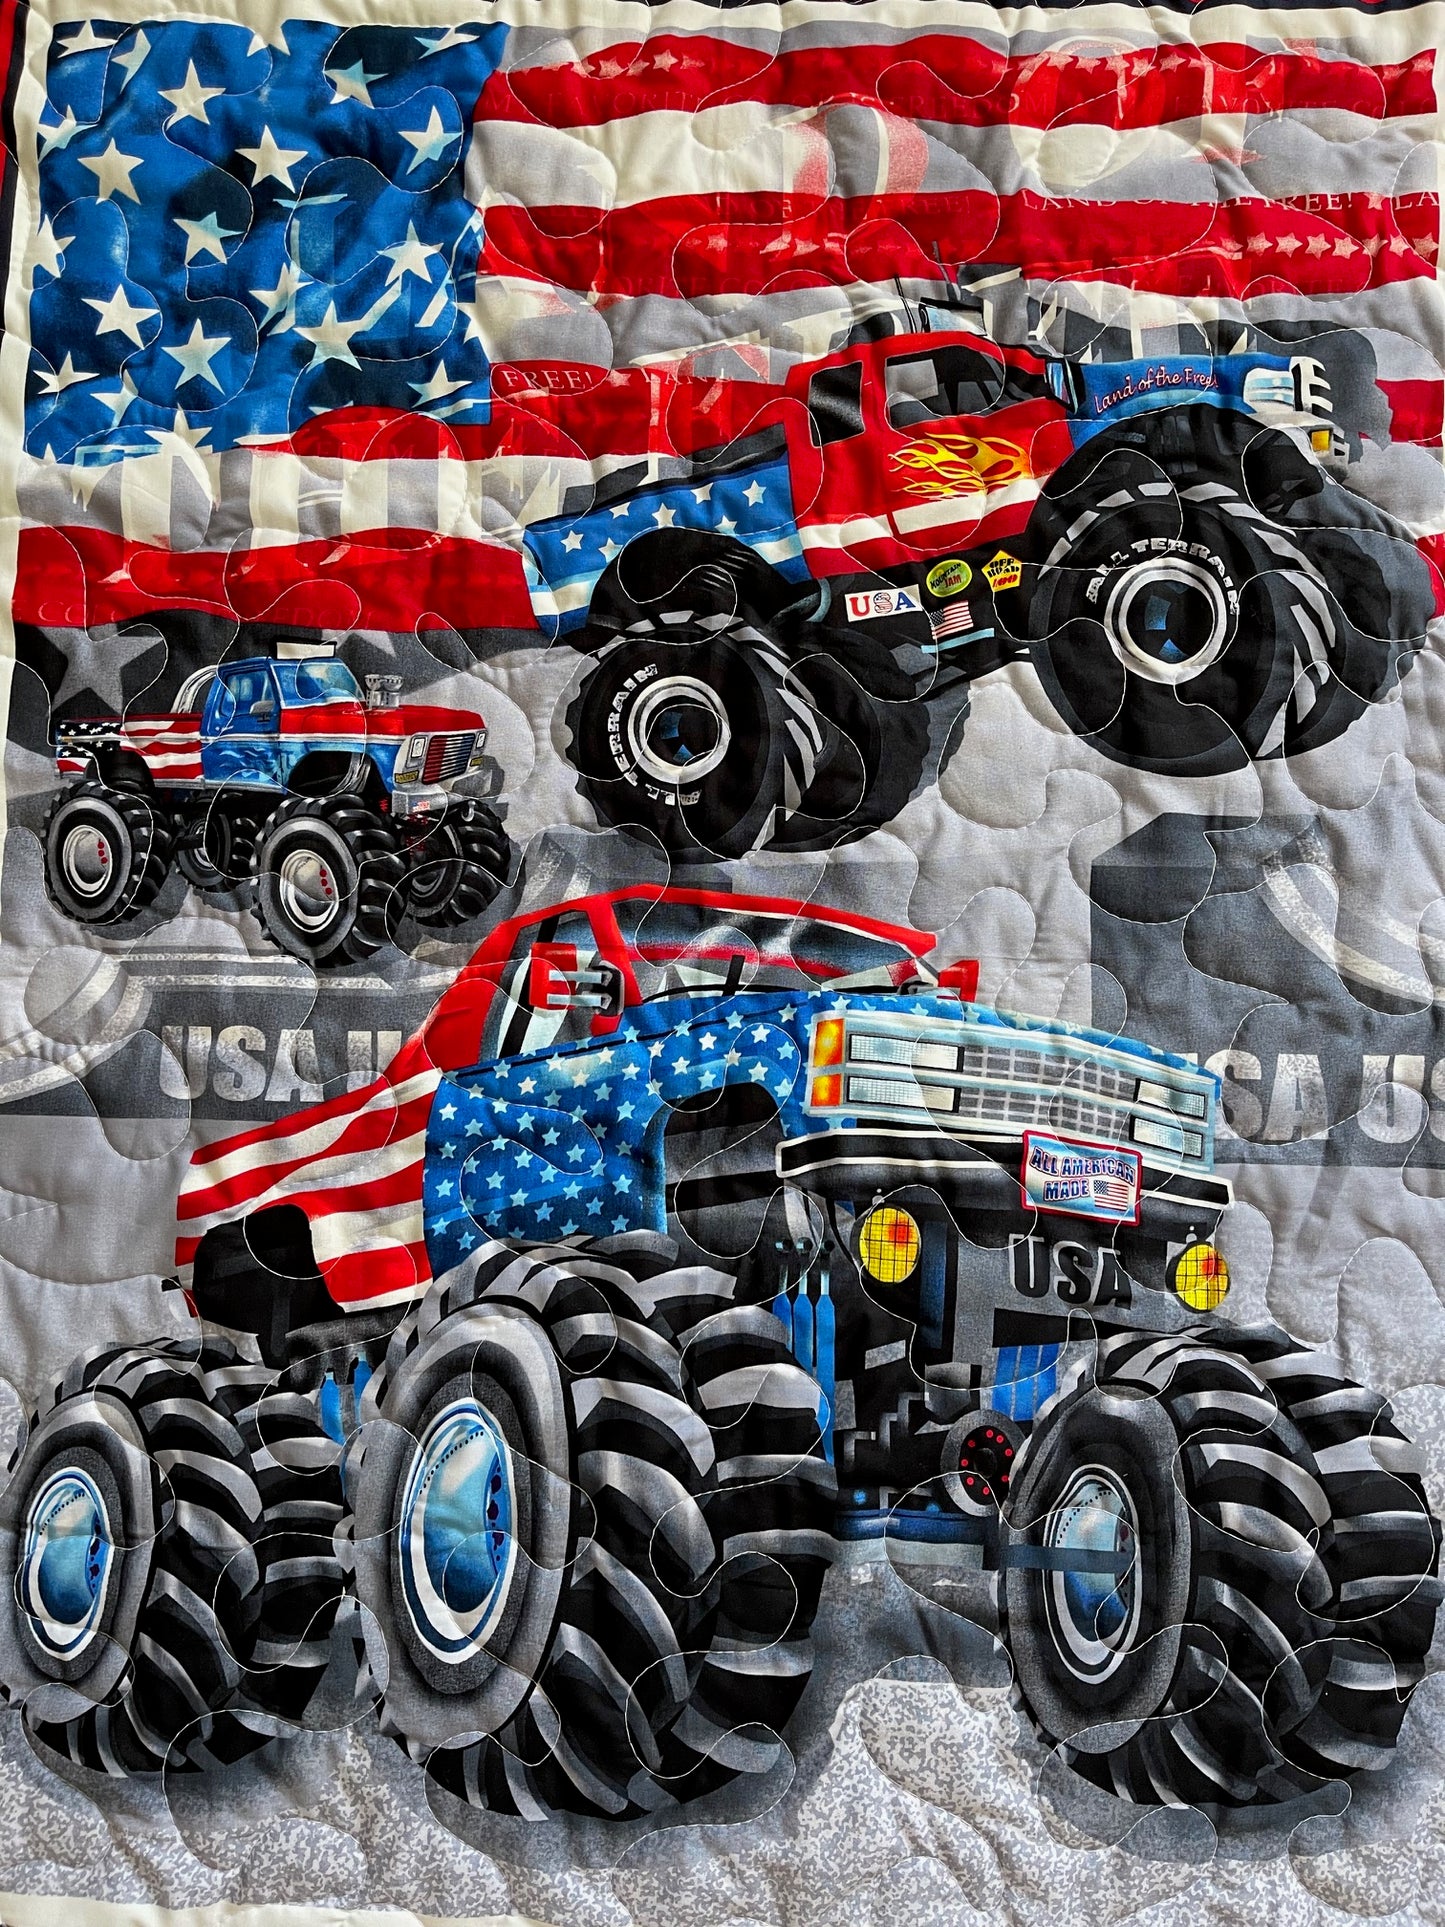 USA MONSTER TRUCK LAND OF THE FREE ALL AMERICAN MADE QUILTED BLANKET